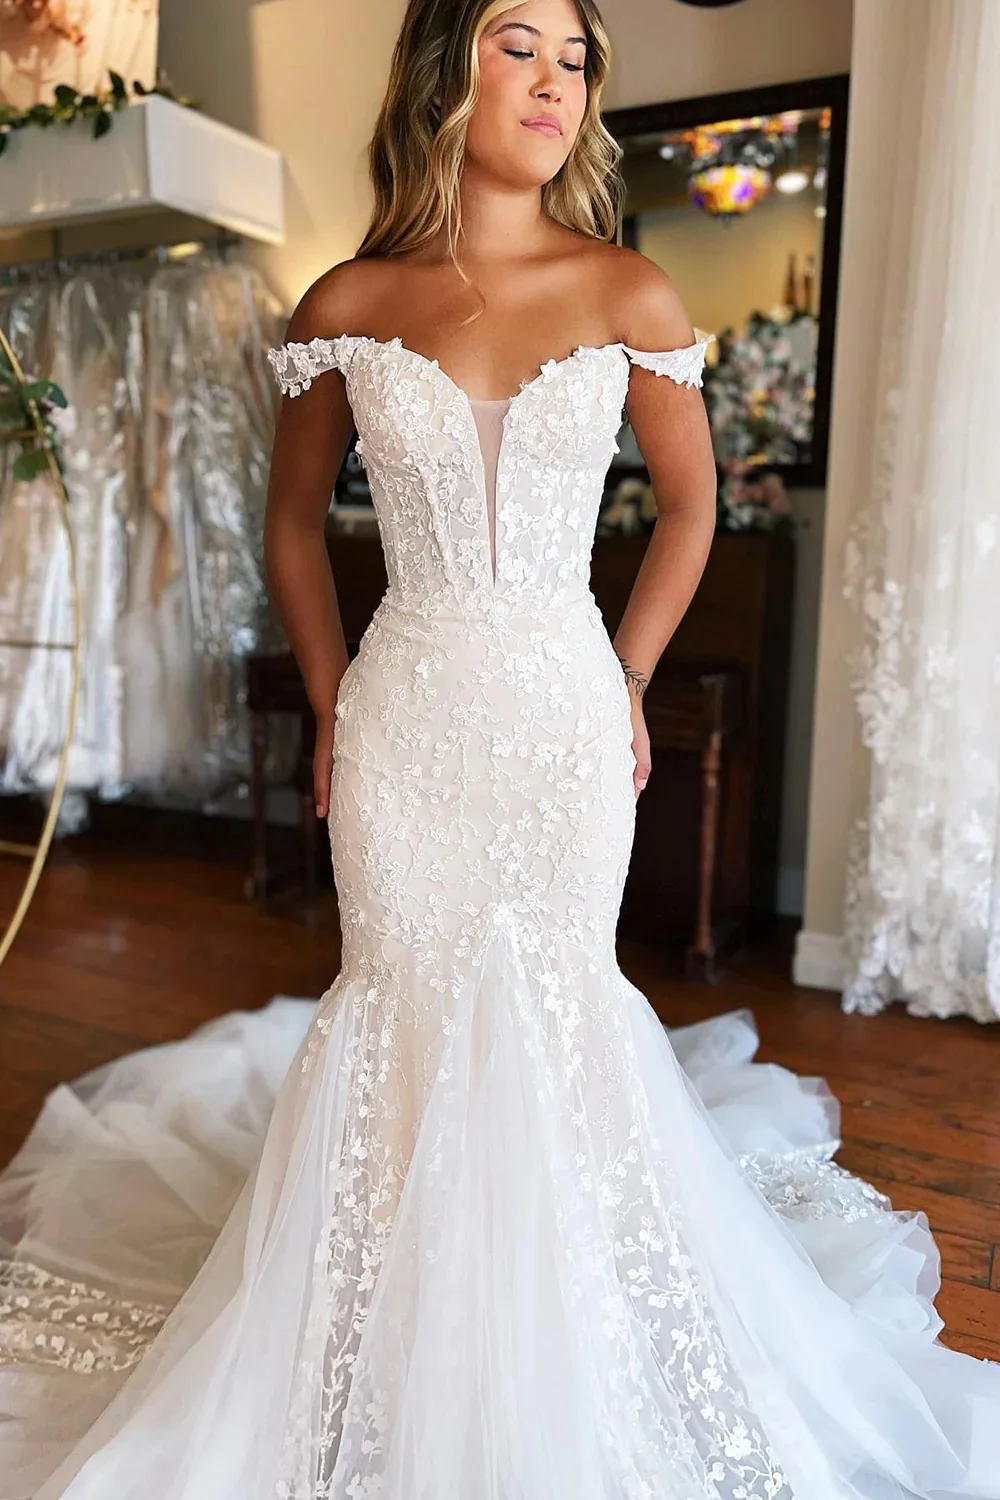 White Off-The-Shoulder Mermaid Tulle Prom Wedding Dress,DP967